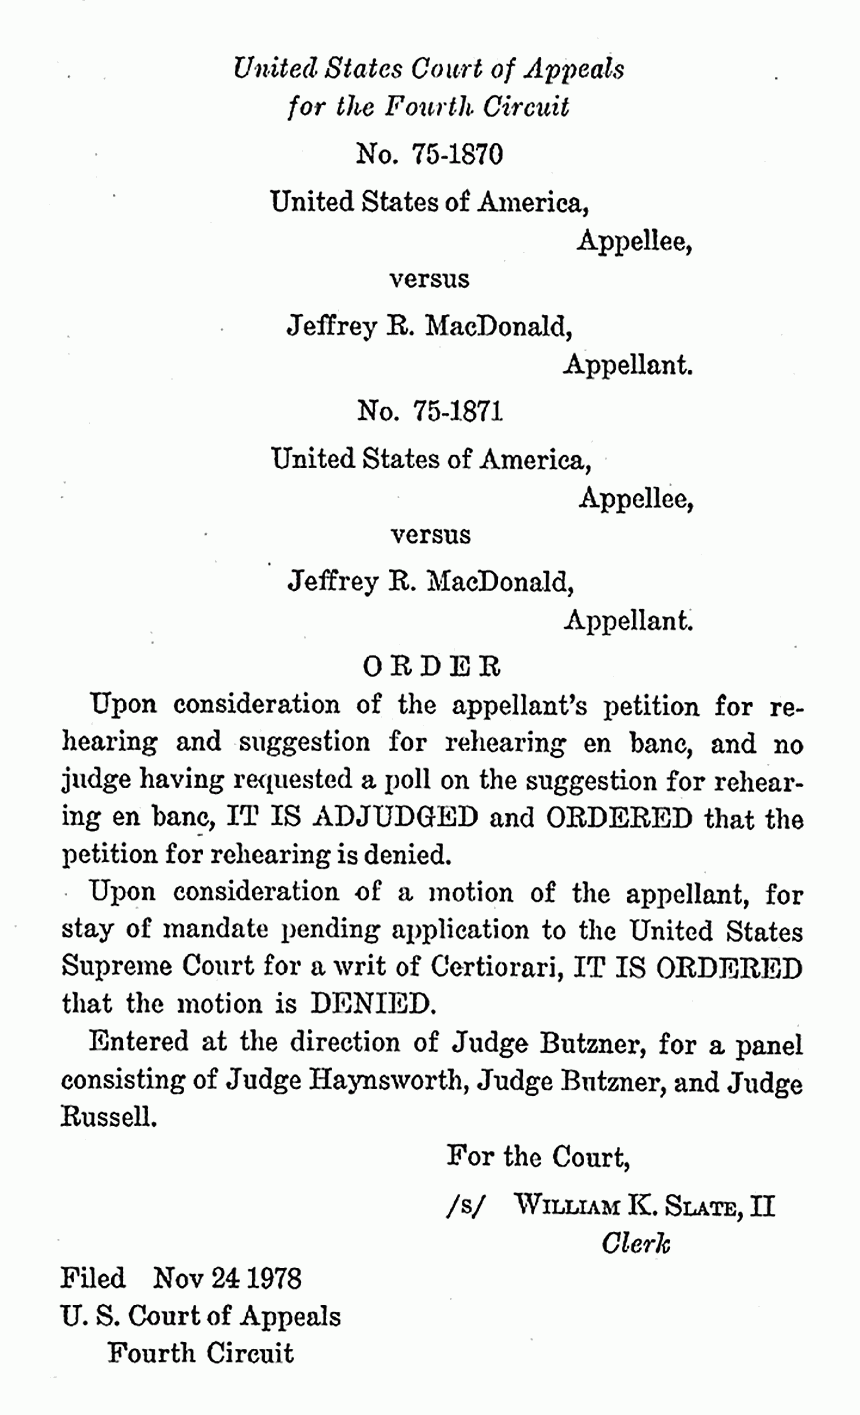 November 24, 1978: U. S. Court of Appeals for the Fourth Circuit: Order Denying (1) Petition by Jeffrey MacDonald for Rehearing and (2) Motion by Jeffrey MacDonald for Stay of Mandate Pending Application to the U.S. Supreme Court for Writ of Certiorari